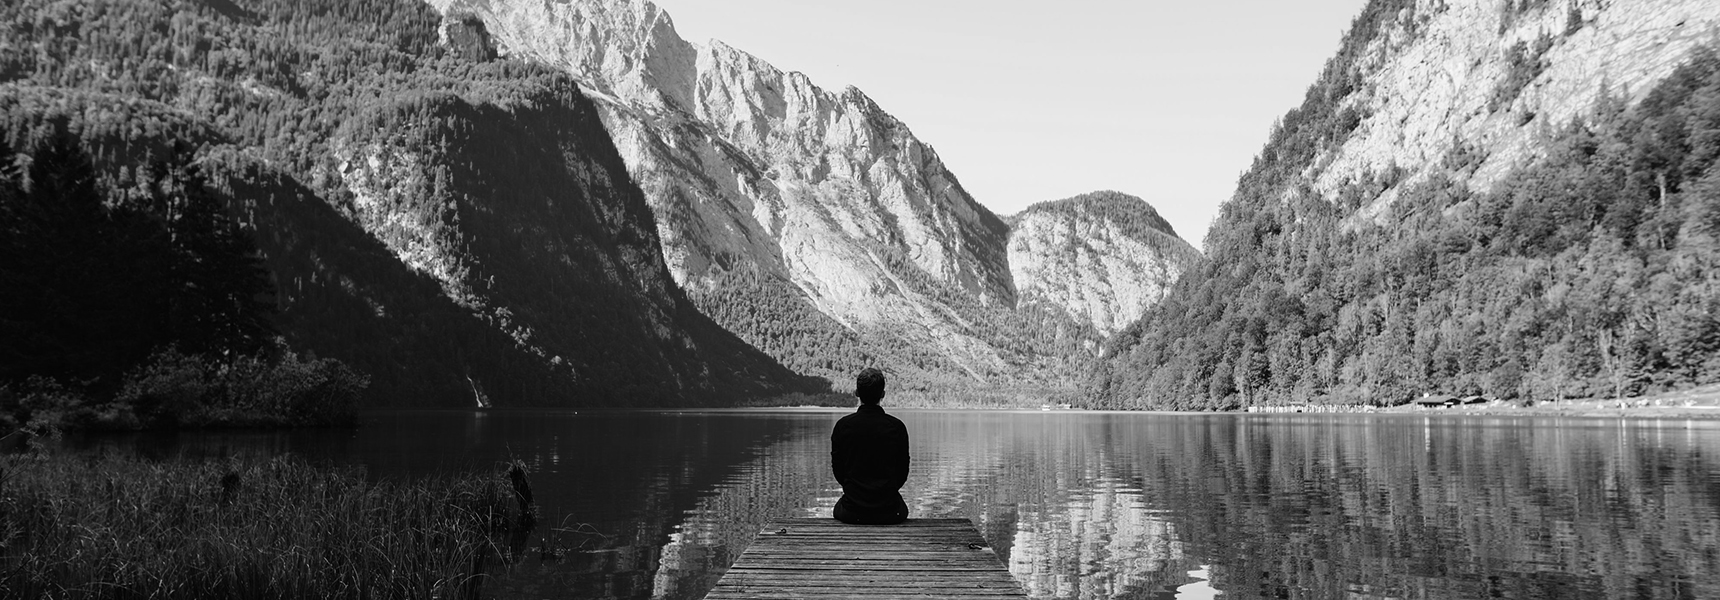 a man meditating on the end of a dock in front of a lake in the mountains